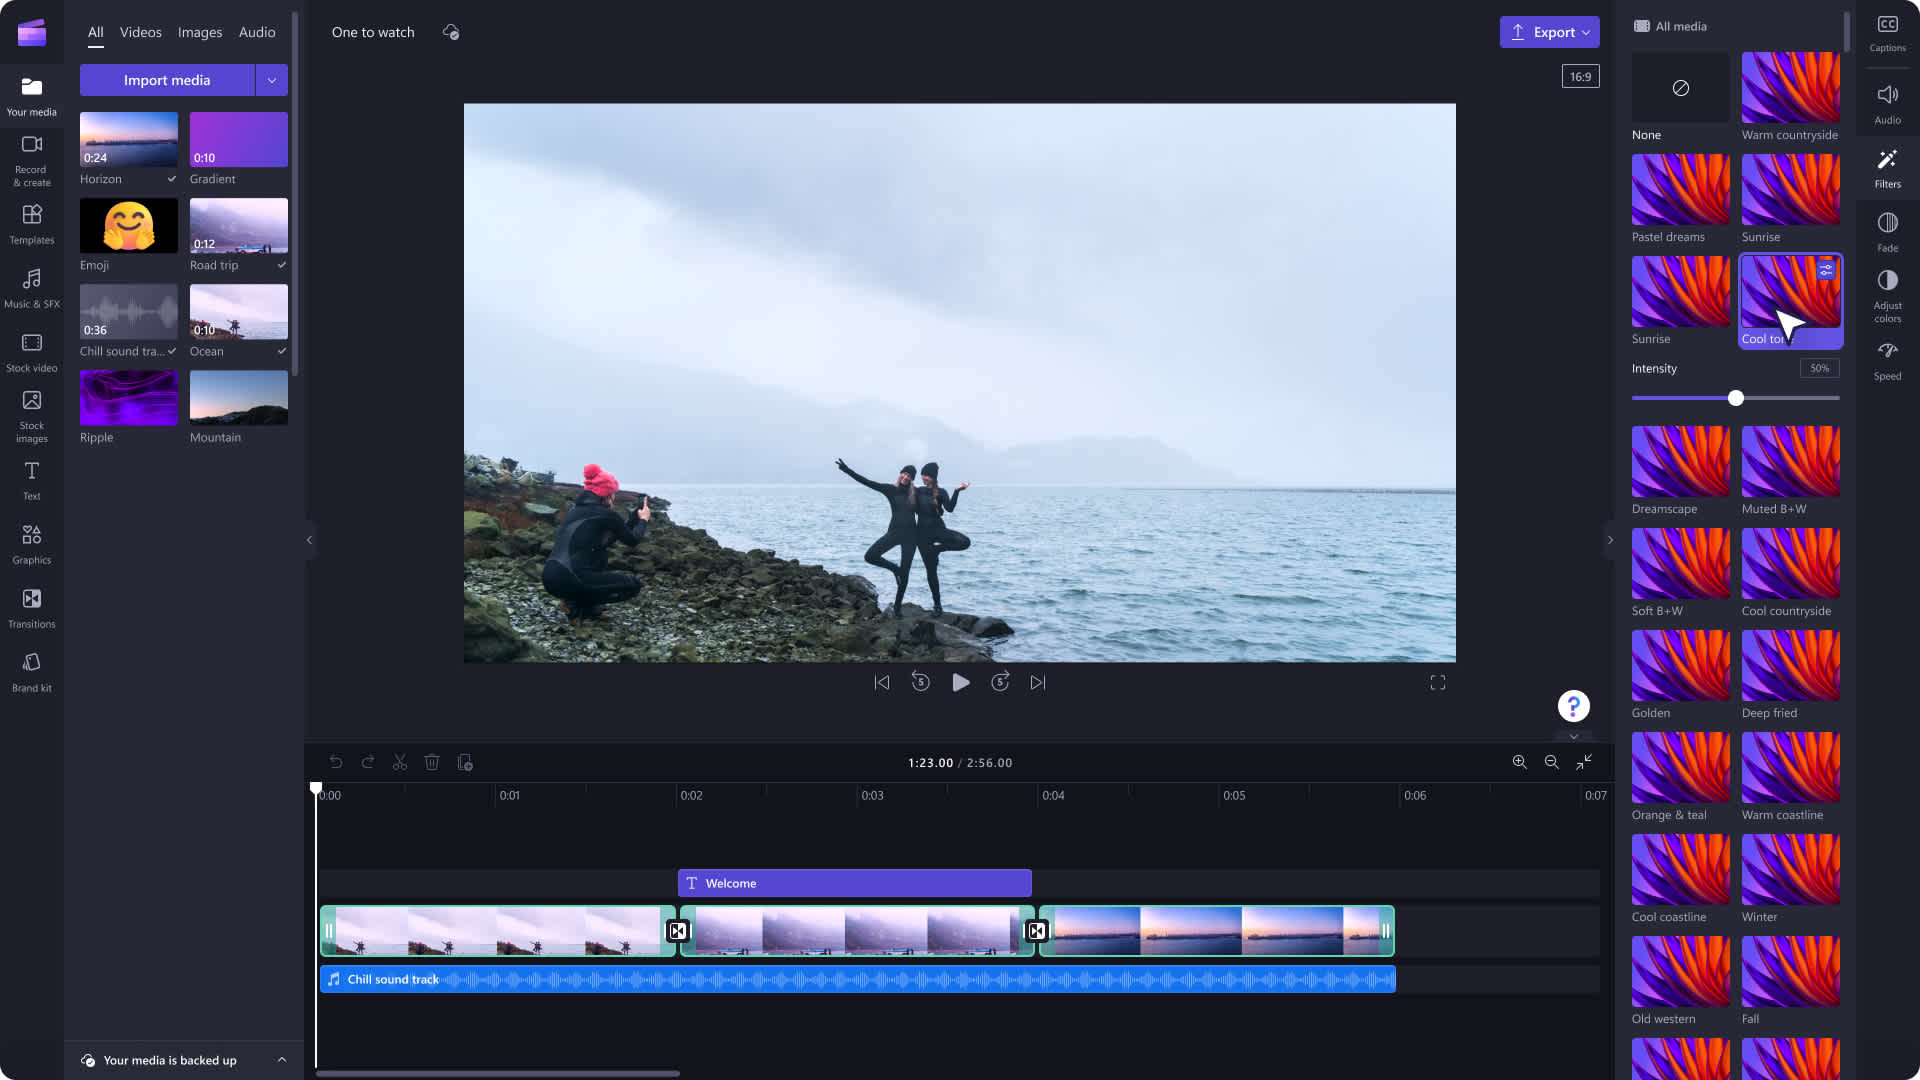 Windows Video Editor 2022 - Everything You Need to Edit Your Videos.